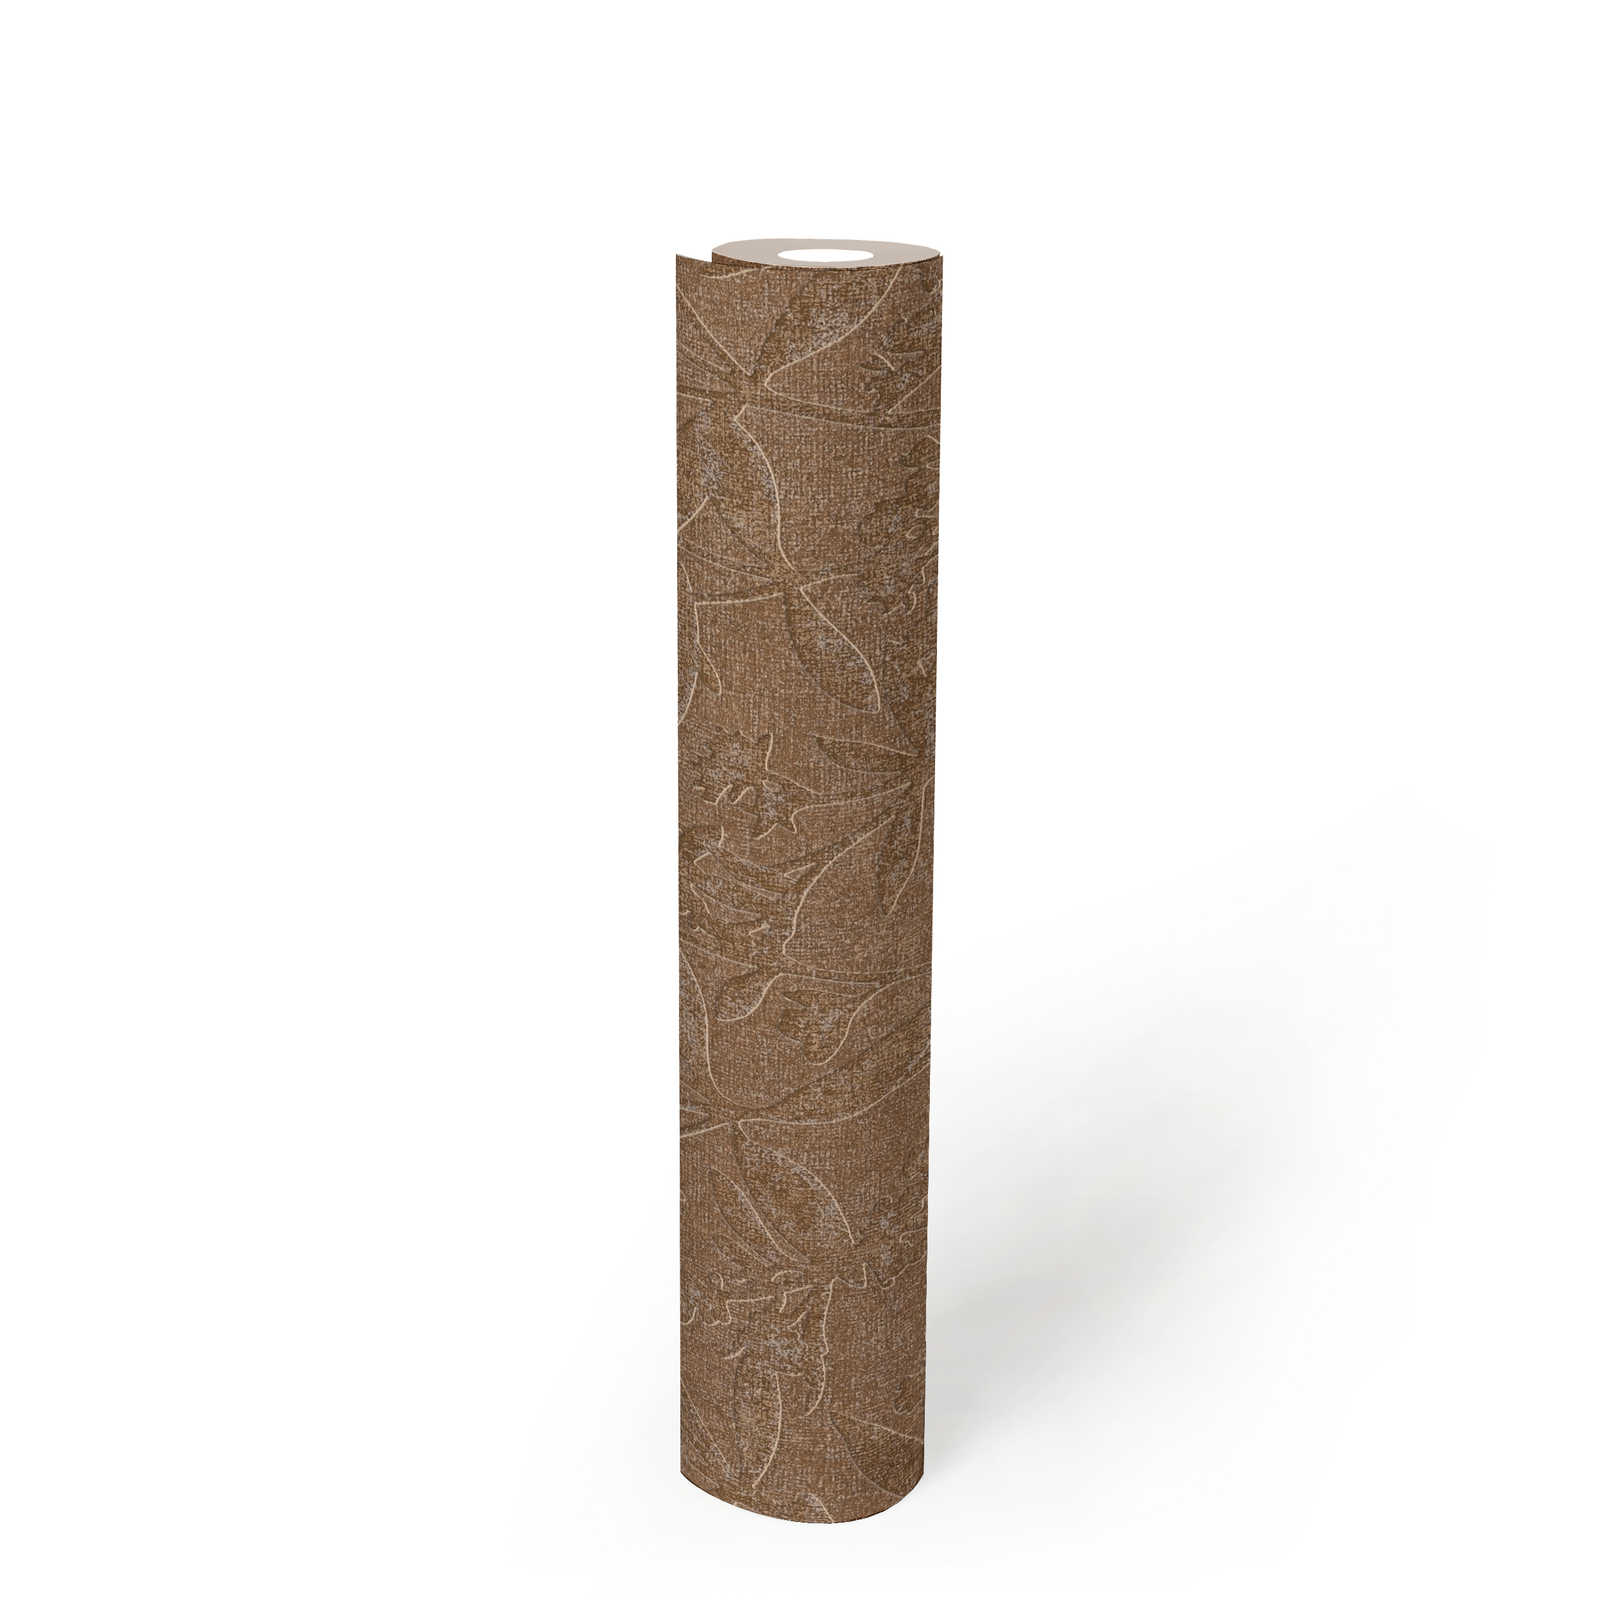             Non-woven wallpaper floral flowers and leaves - brown, beige
        